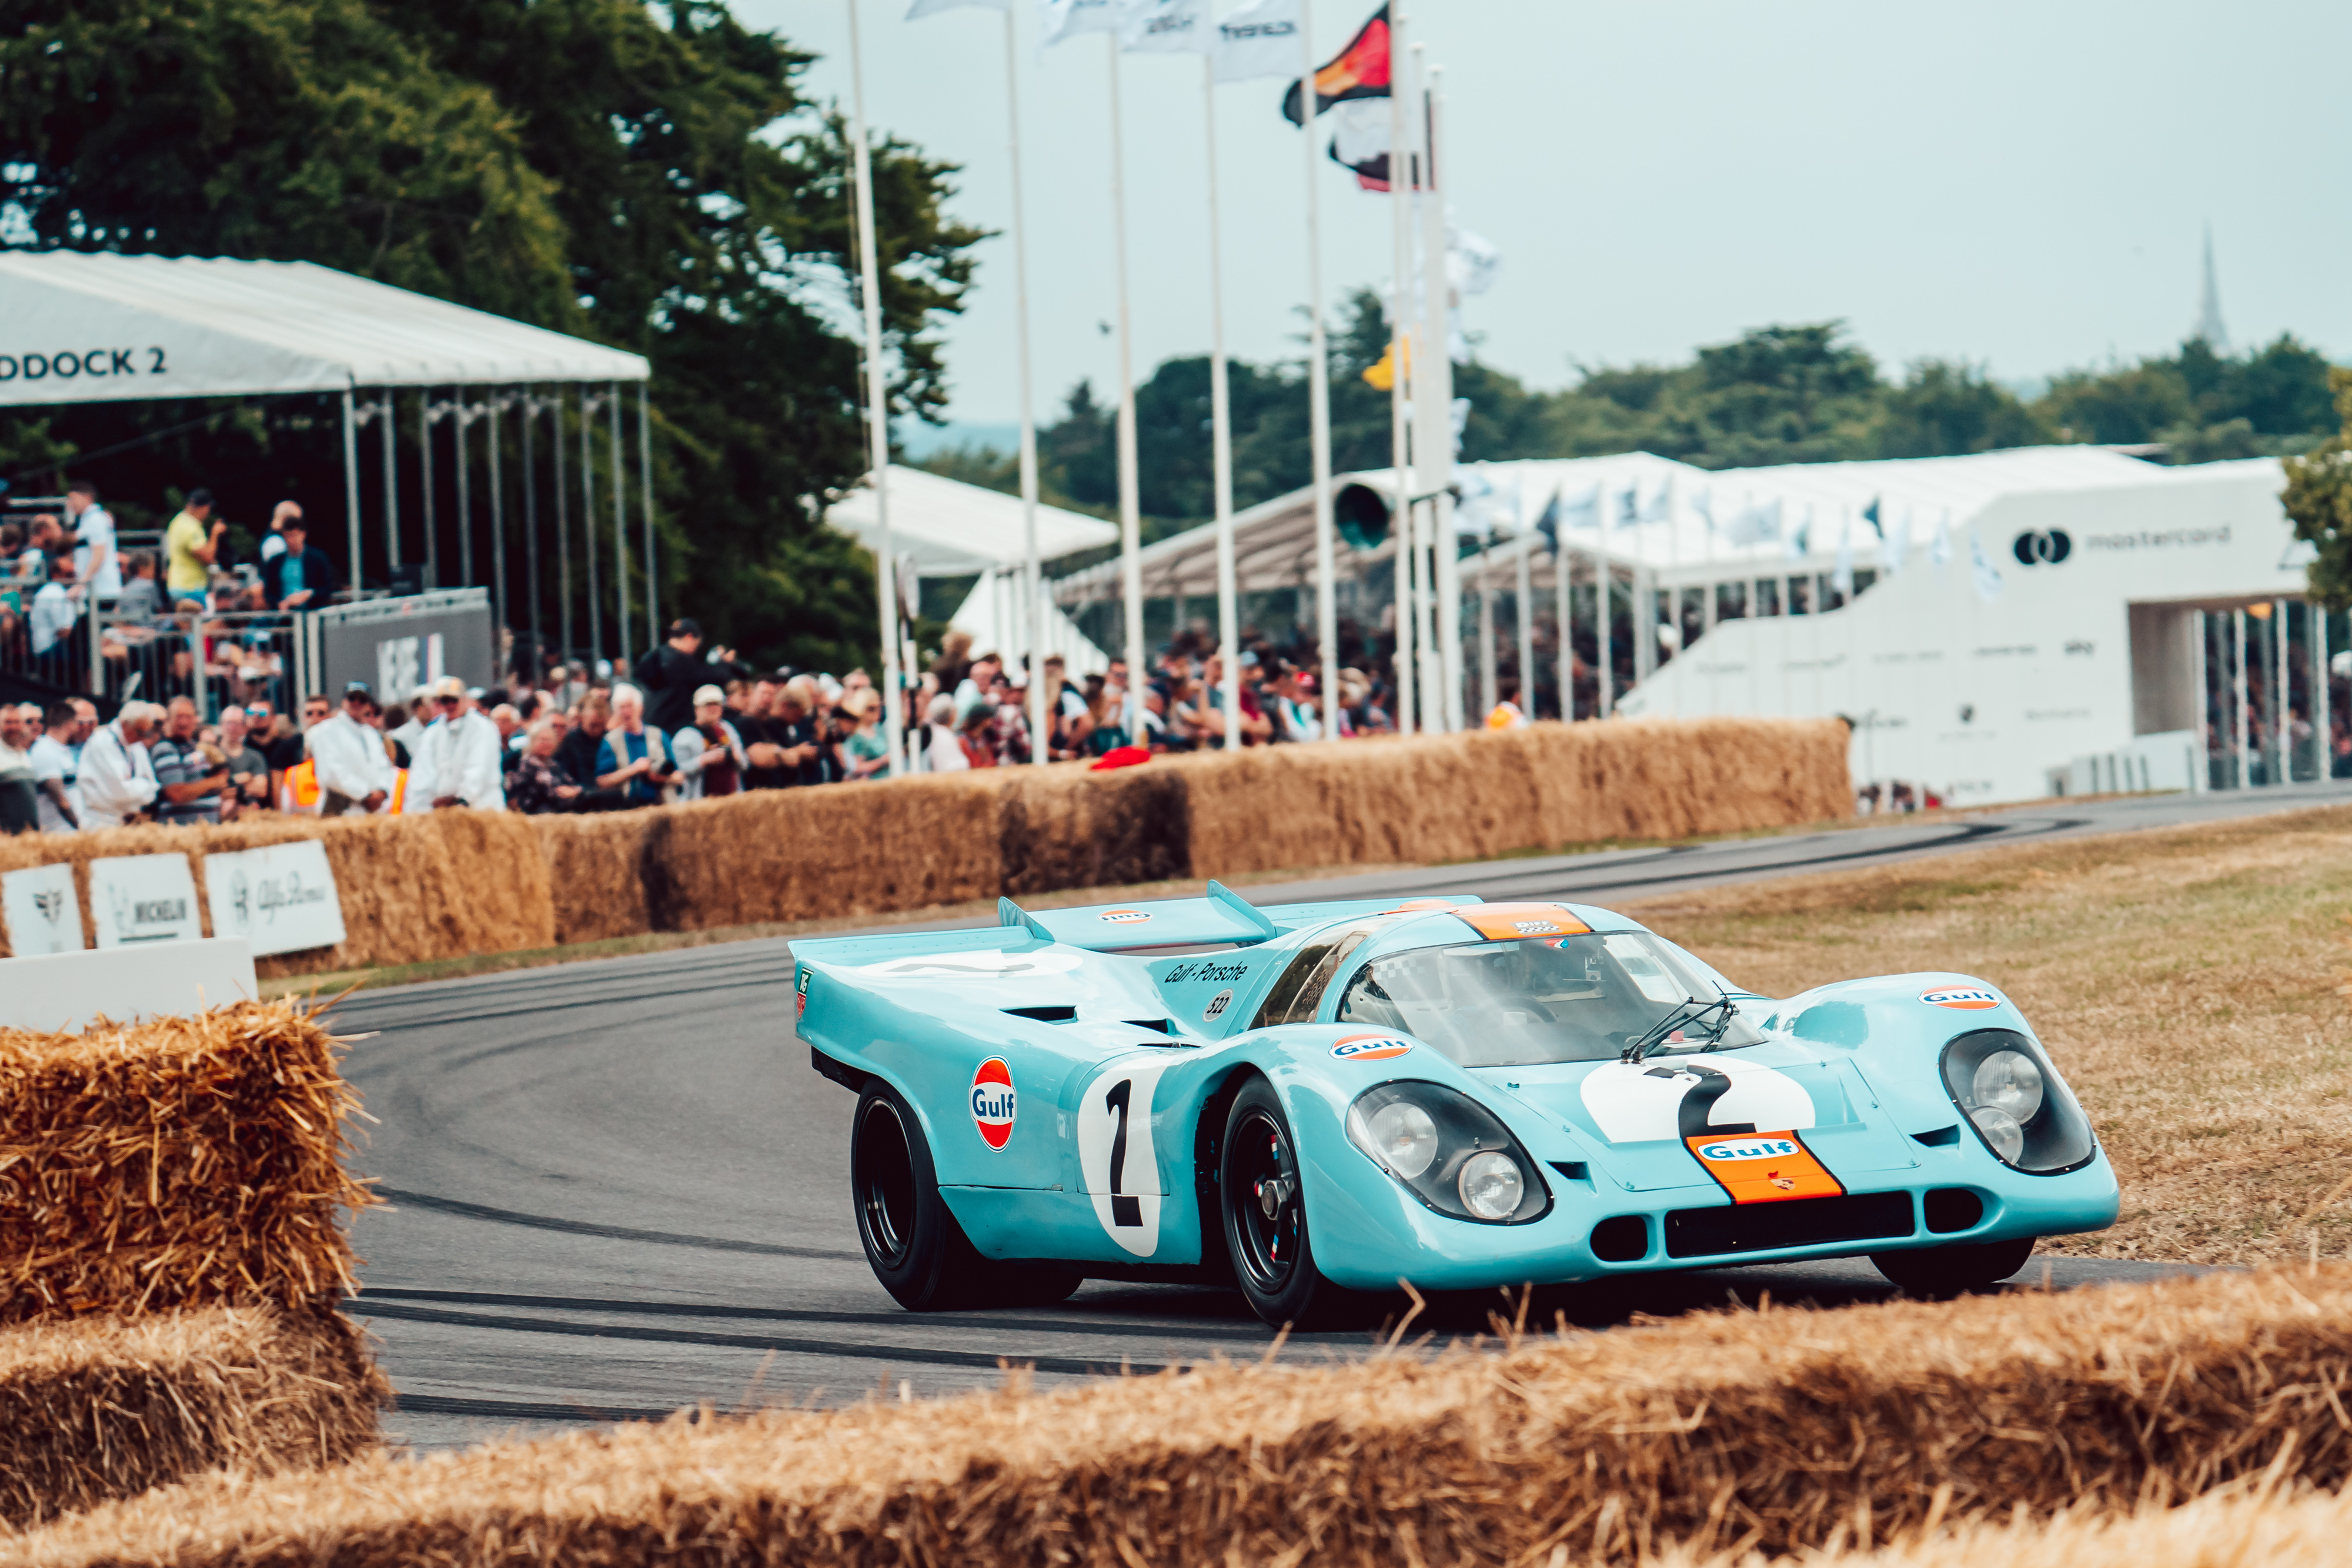 Porsche 917K in iconic Gulf Oil livery at Goodwood Festival